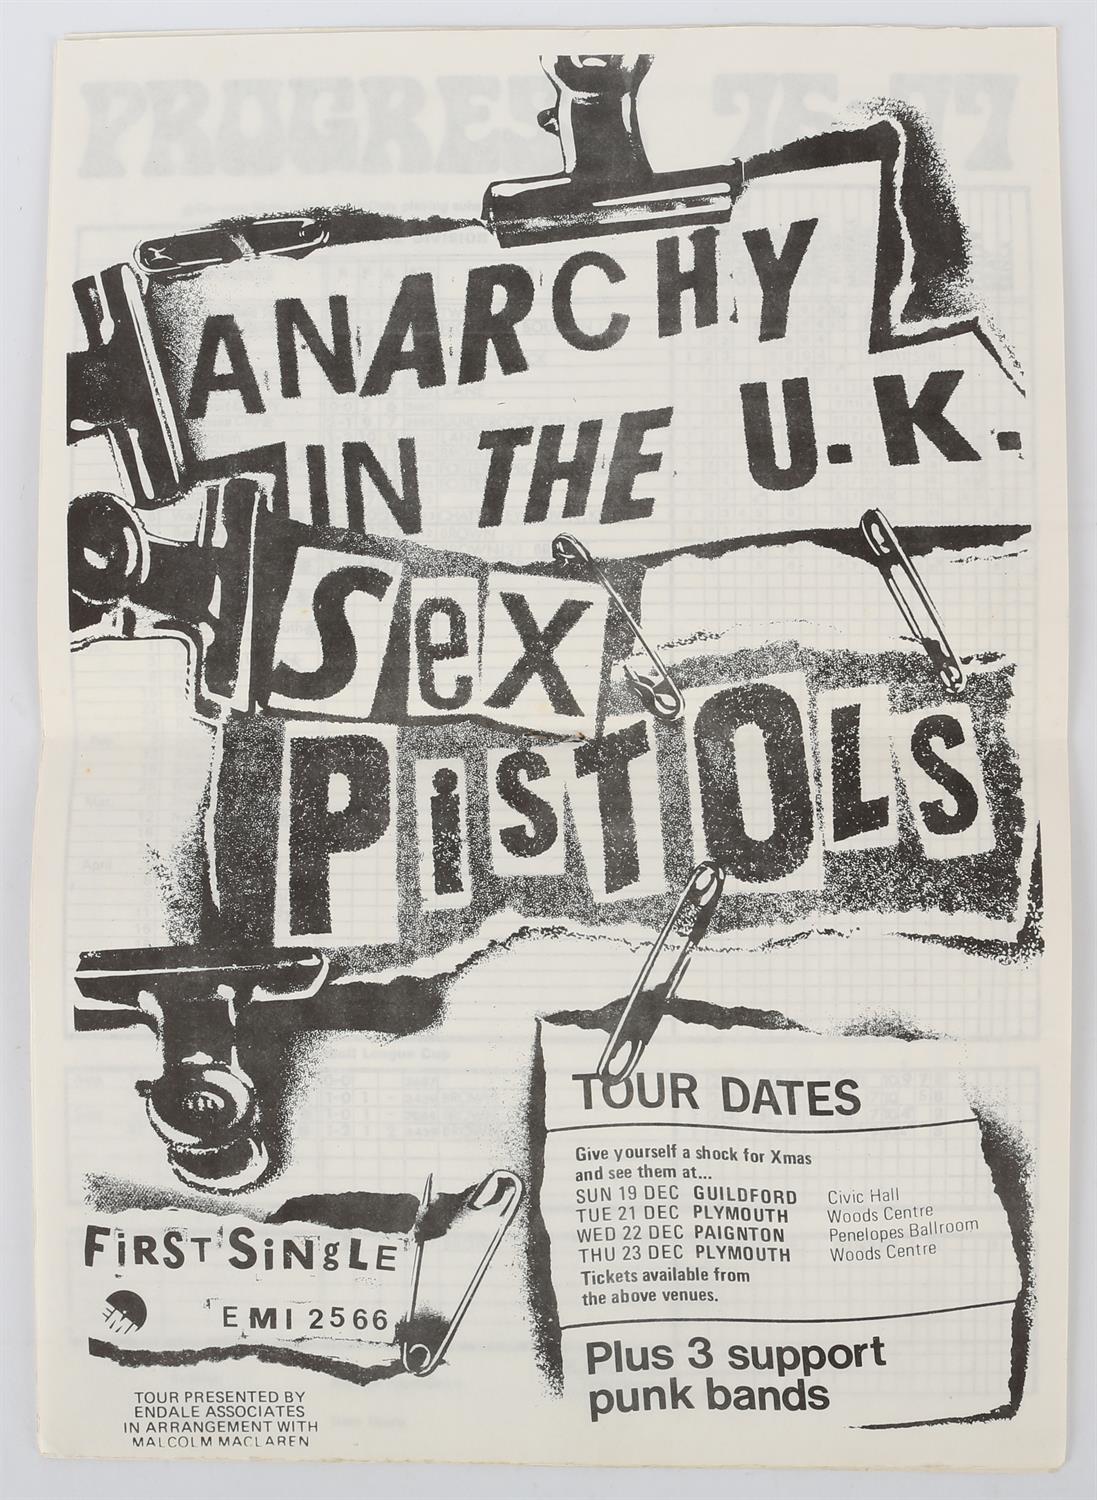 Sex Pistols - Torquay United AFC Programme 1976, with a black and white printed centre flyer,